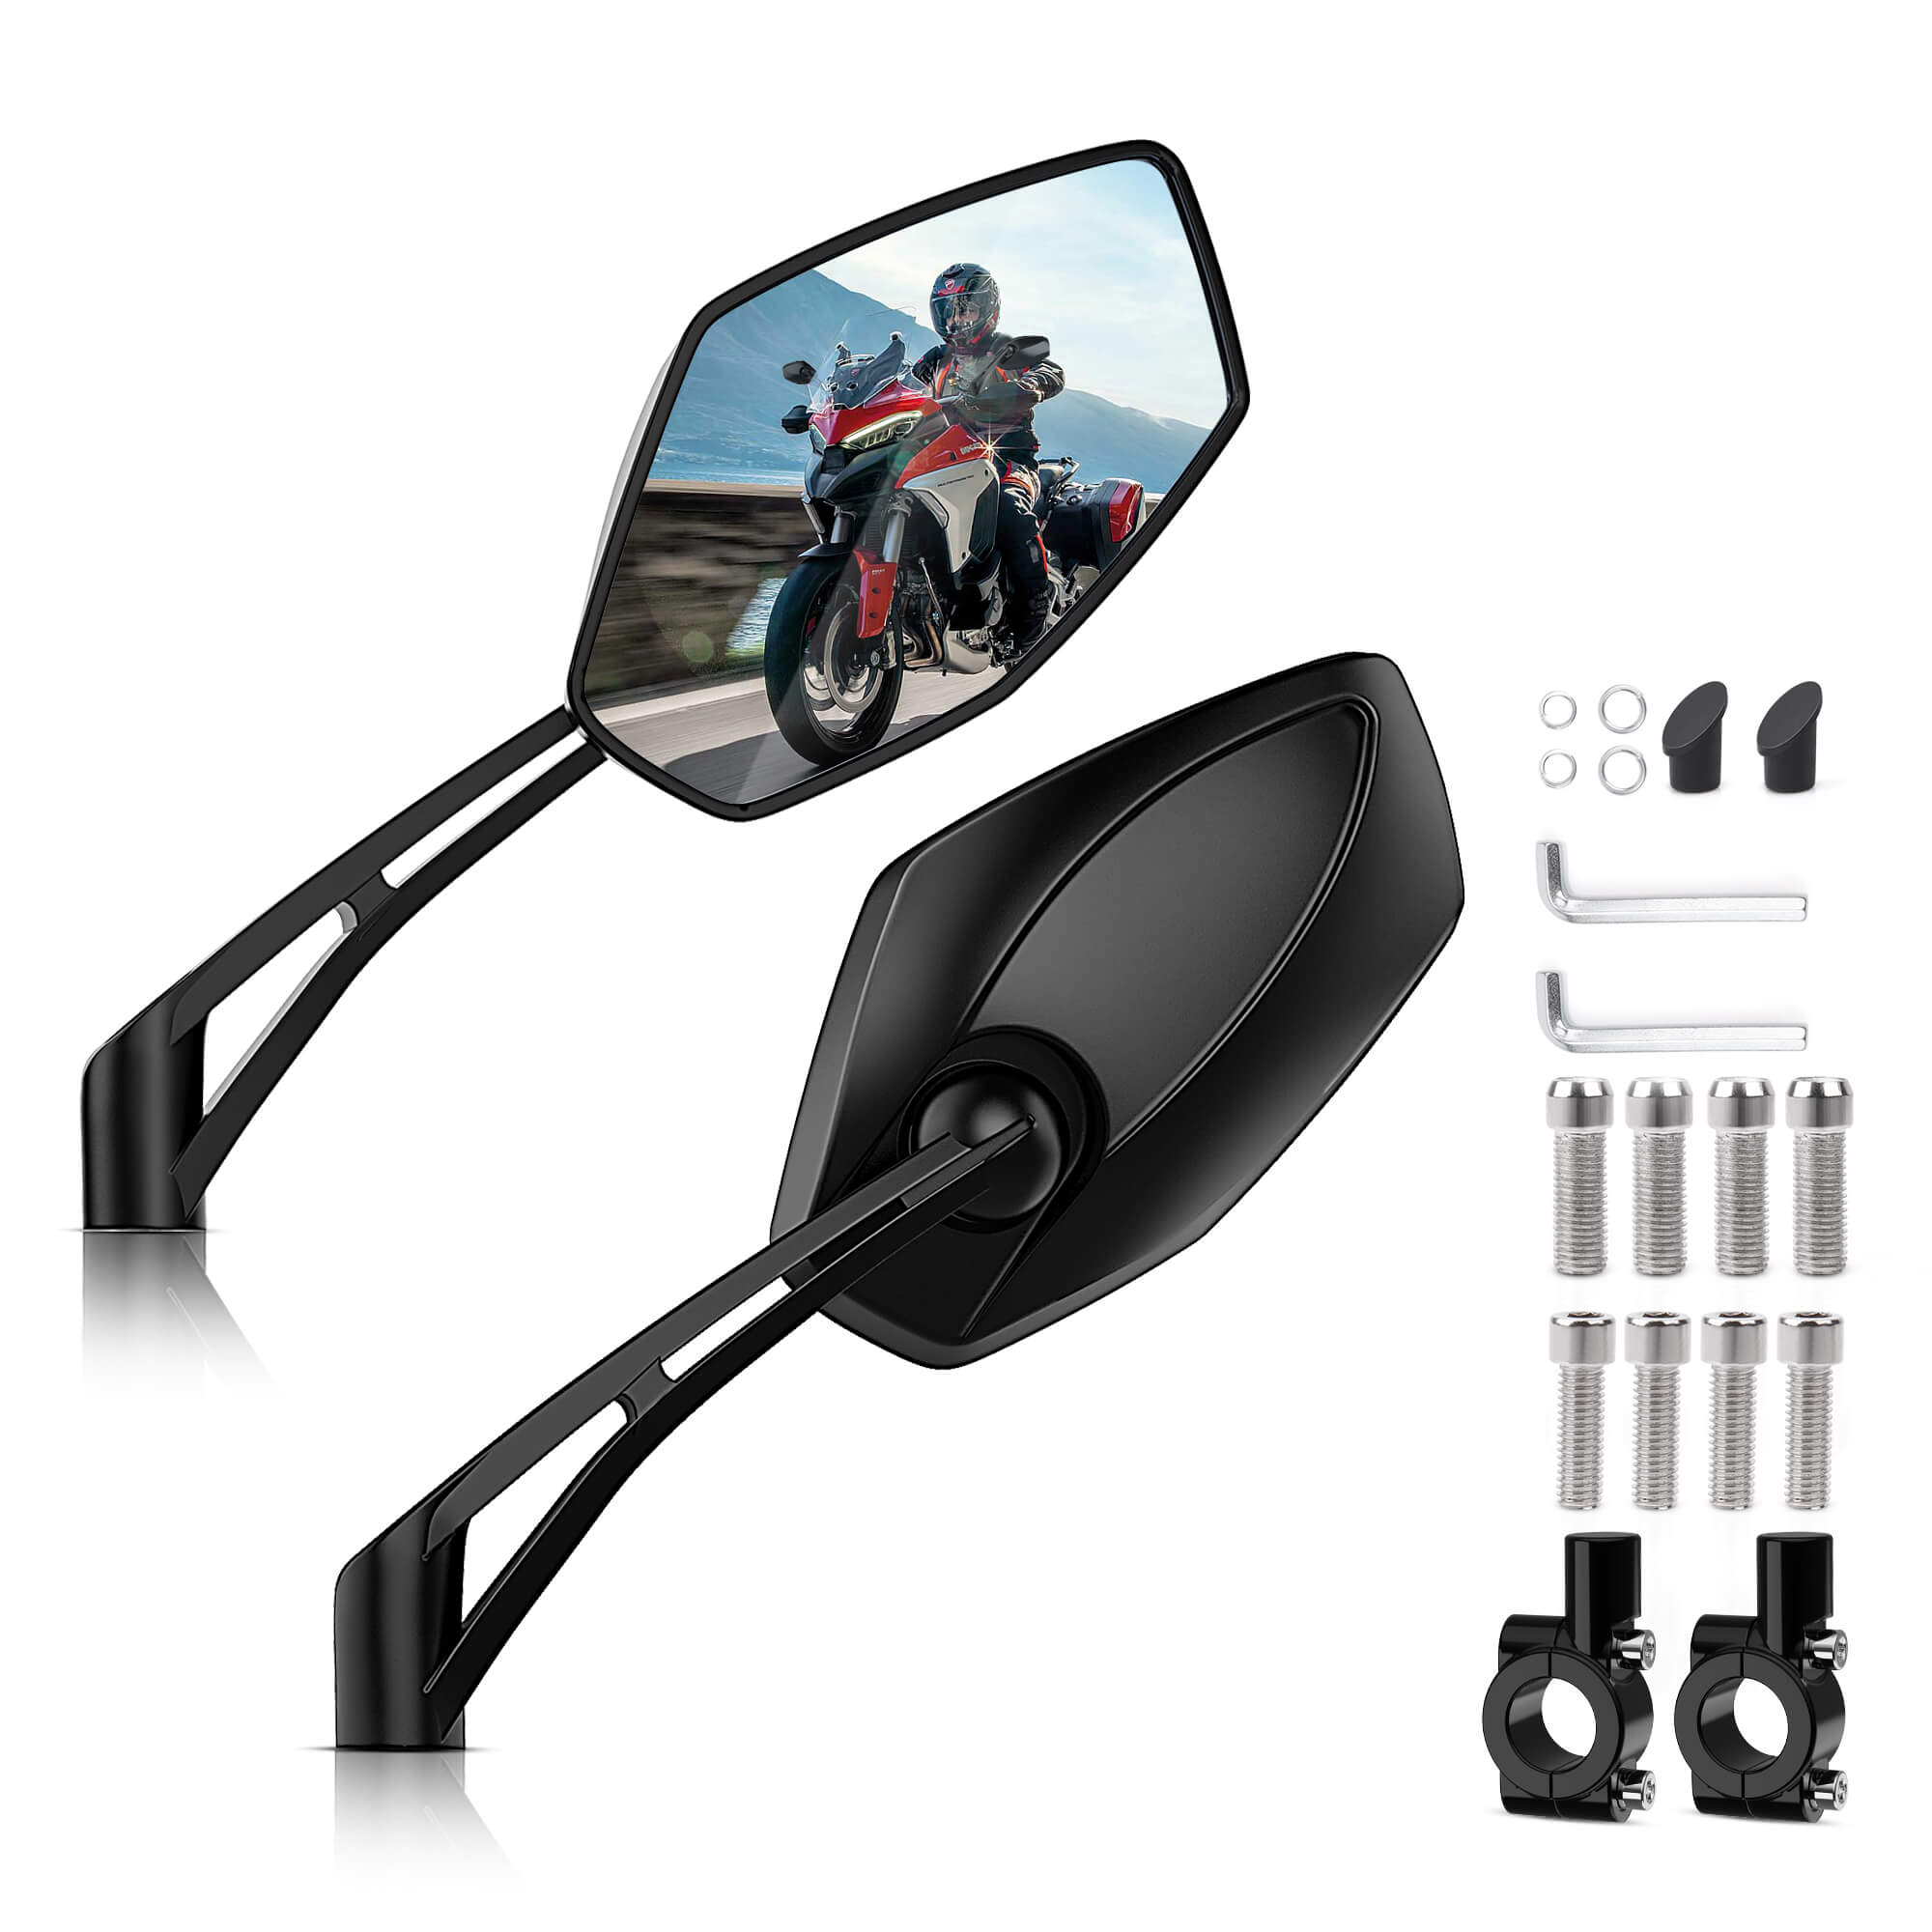 Motorcycle Rearview Mirrors Convex Blue Lens, Impact-Resistant ABS, 180° Rotation Adjustable- Fits M8 M10 Socket or 22mm Diameter Handlebar